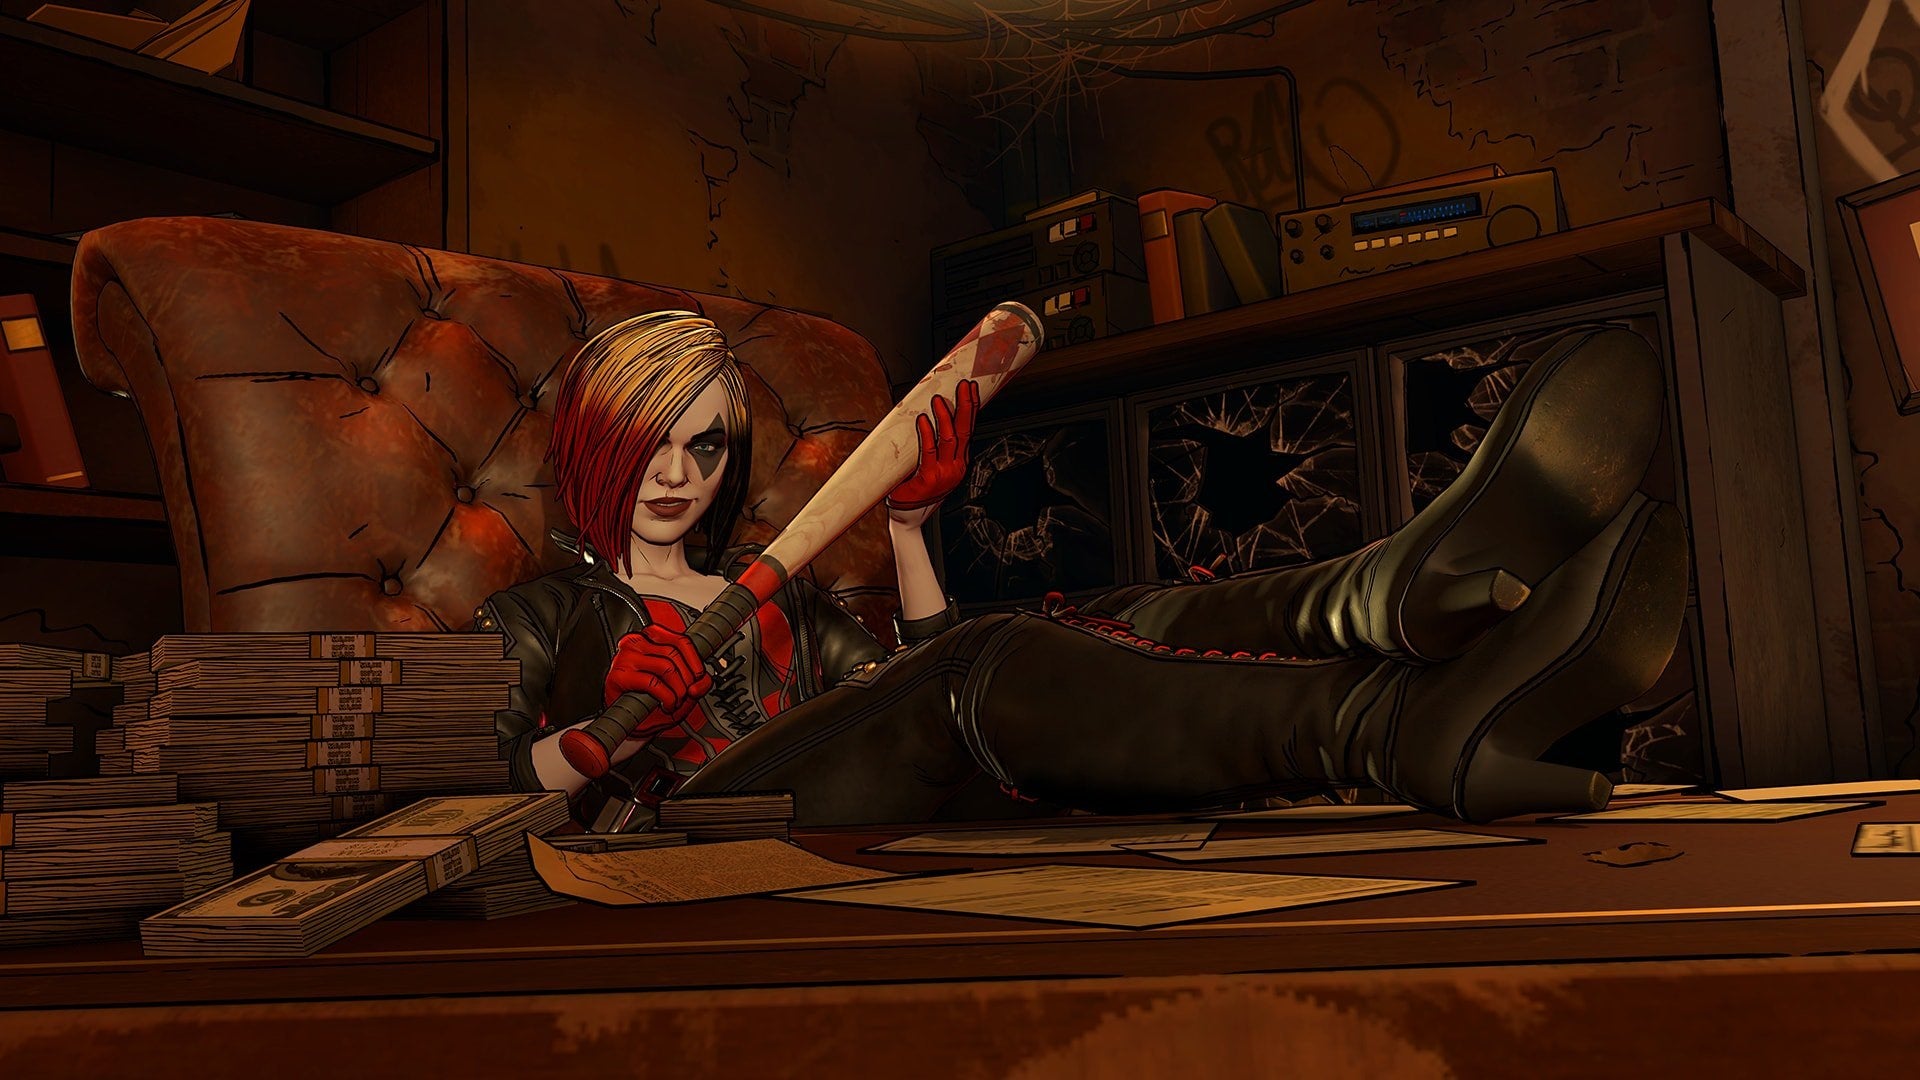 Image for The second episode of Batman: The Telltale Series will feature Harley Quinn's series debut